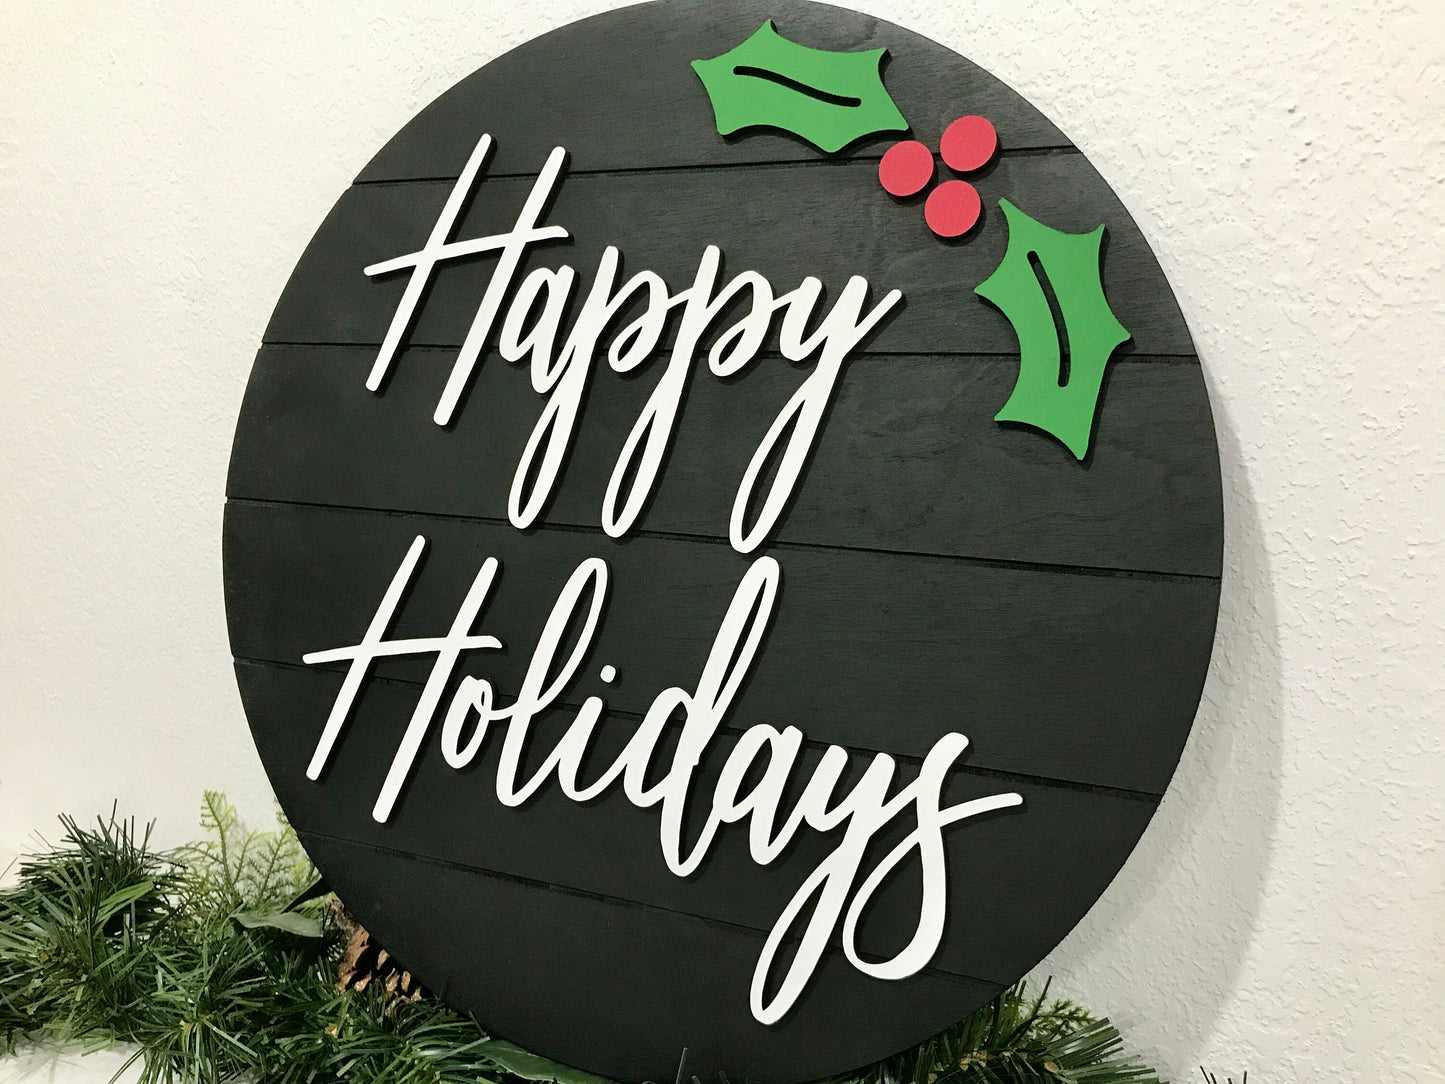 Happy holidays sign, Christmas decorations, 3D holiday decor, shiplap wood signs, living room wooden sign wall hanging, black mantel decor